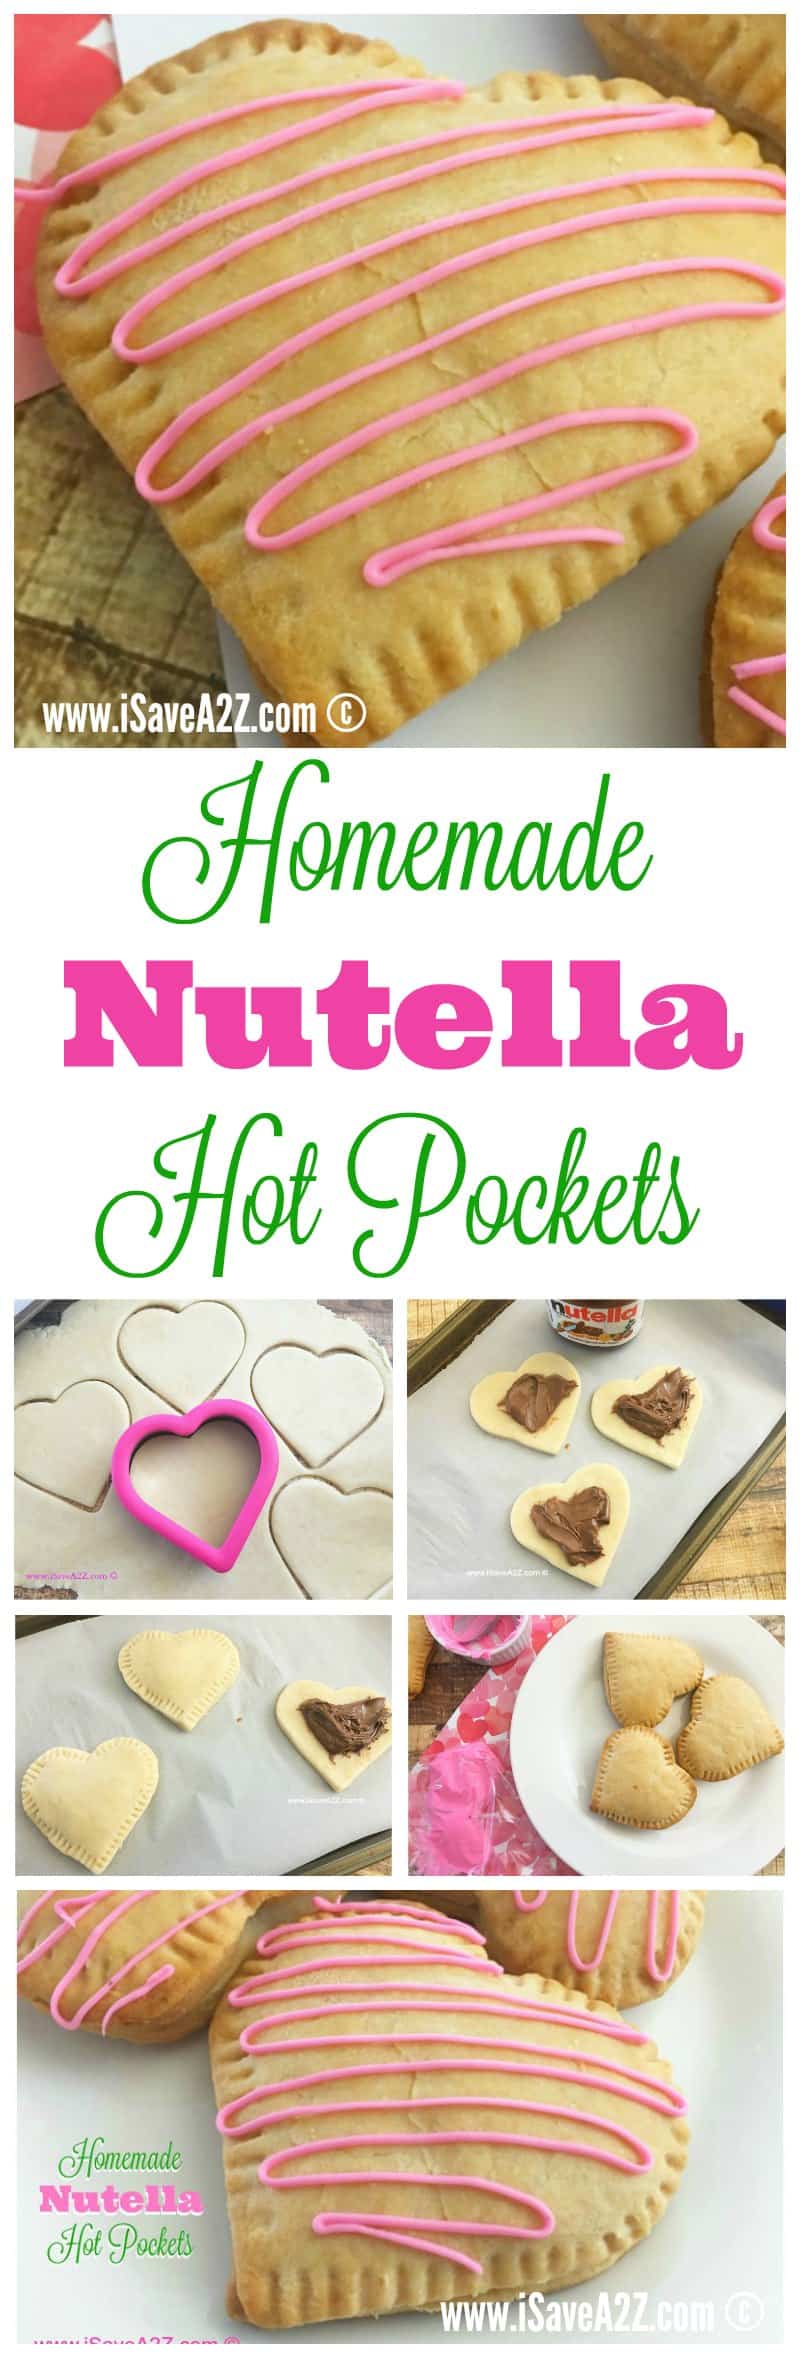 Homemade Heart Shaped Nutella Hot Pockets made from scratch